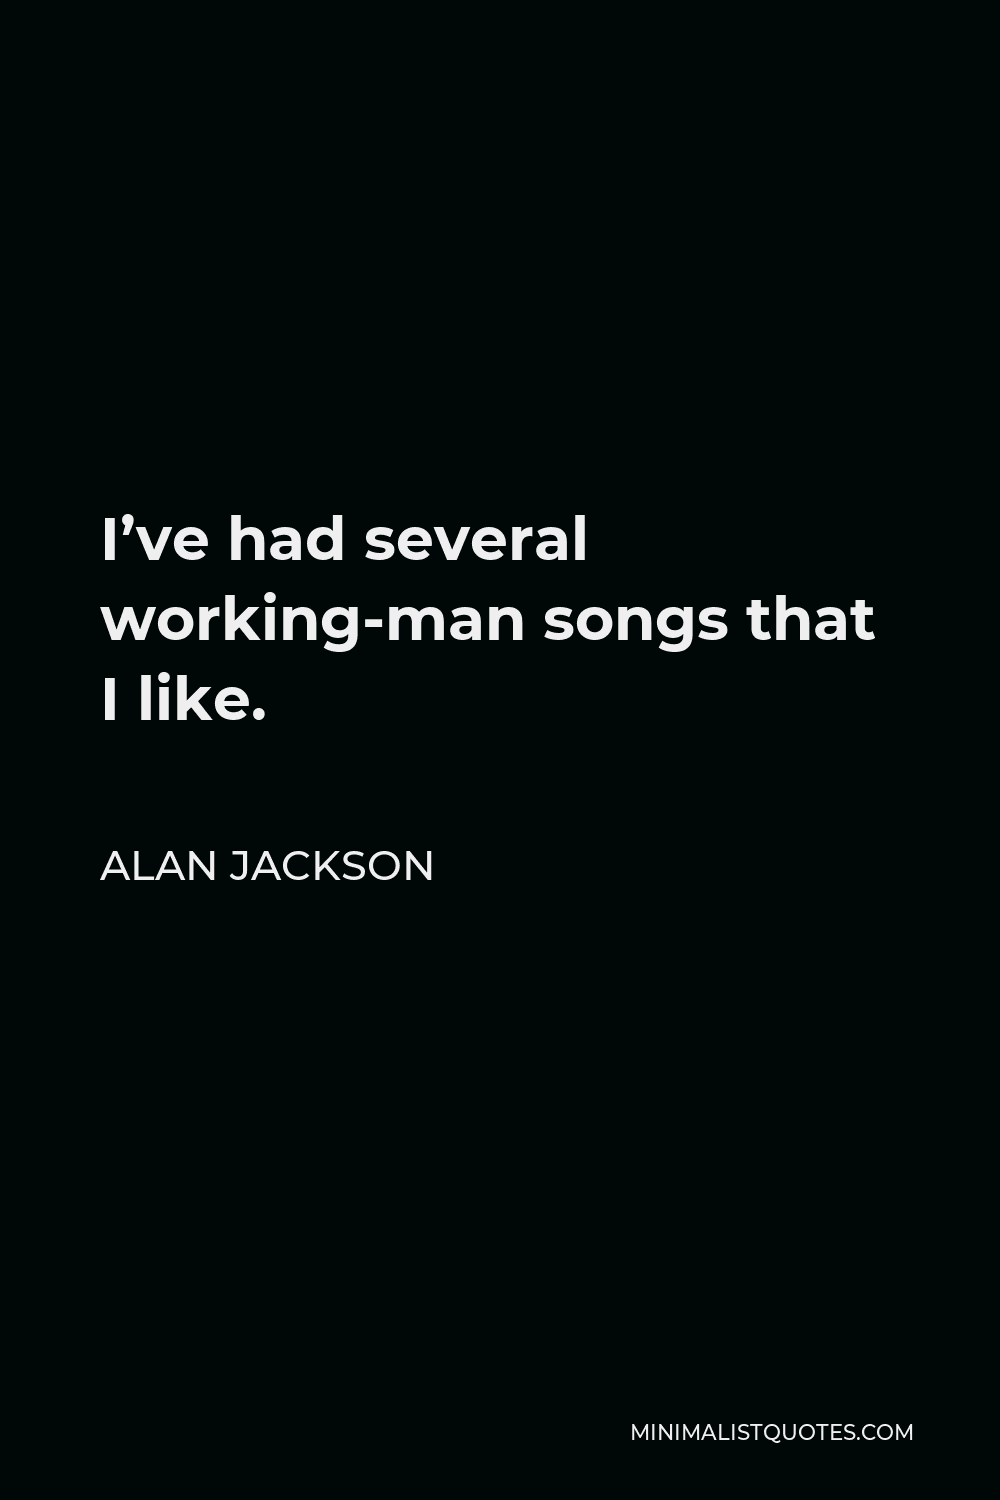 Alan Jackson Quote - I’ve had several working-man songs that I like.